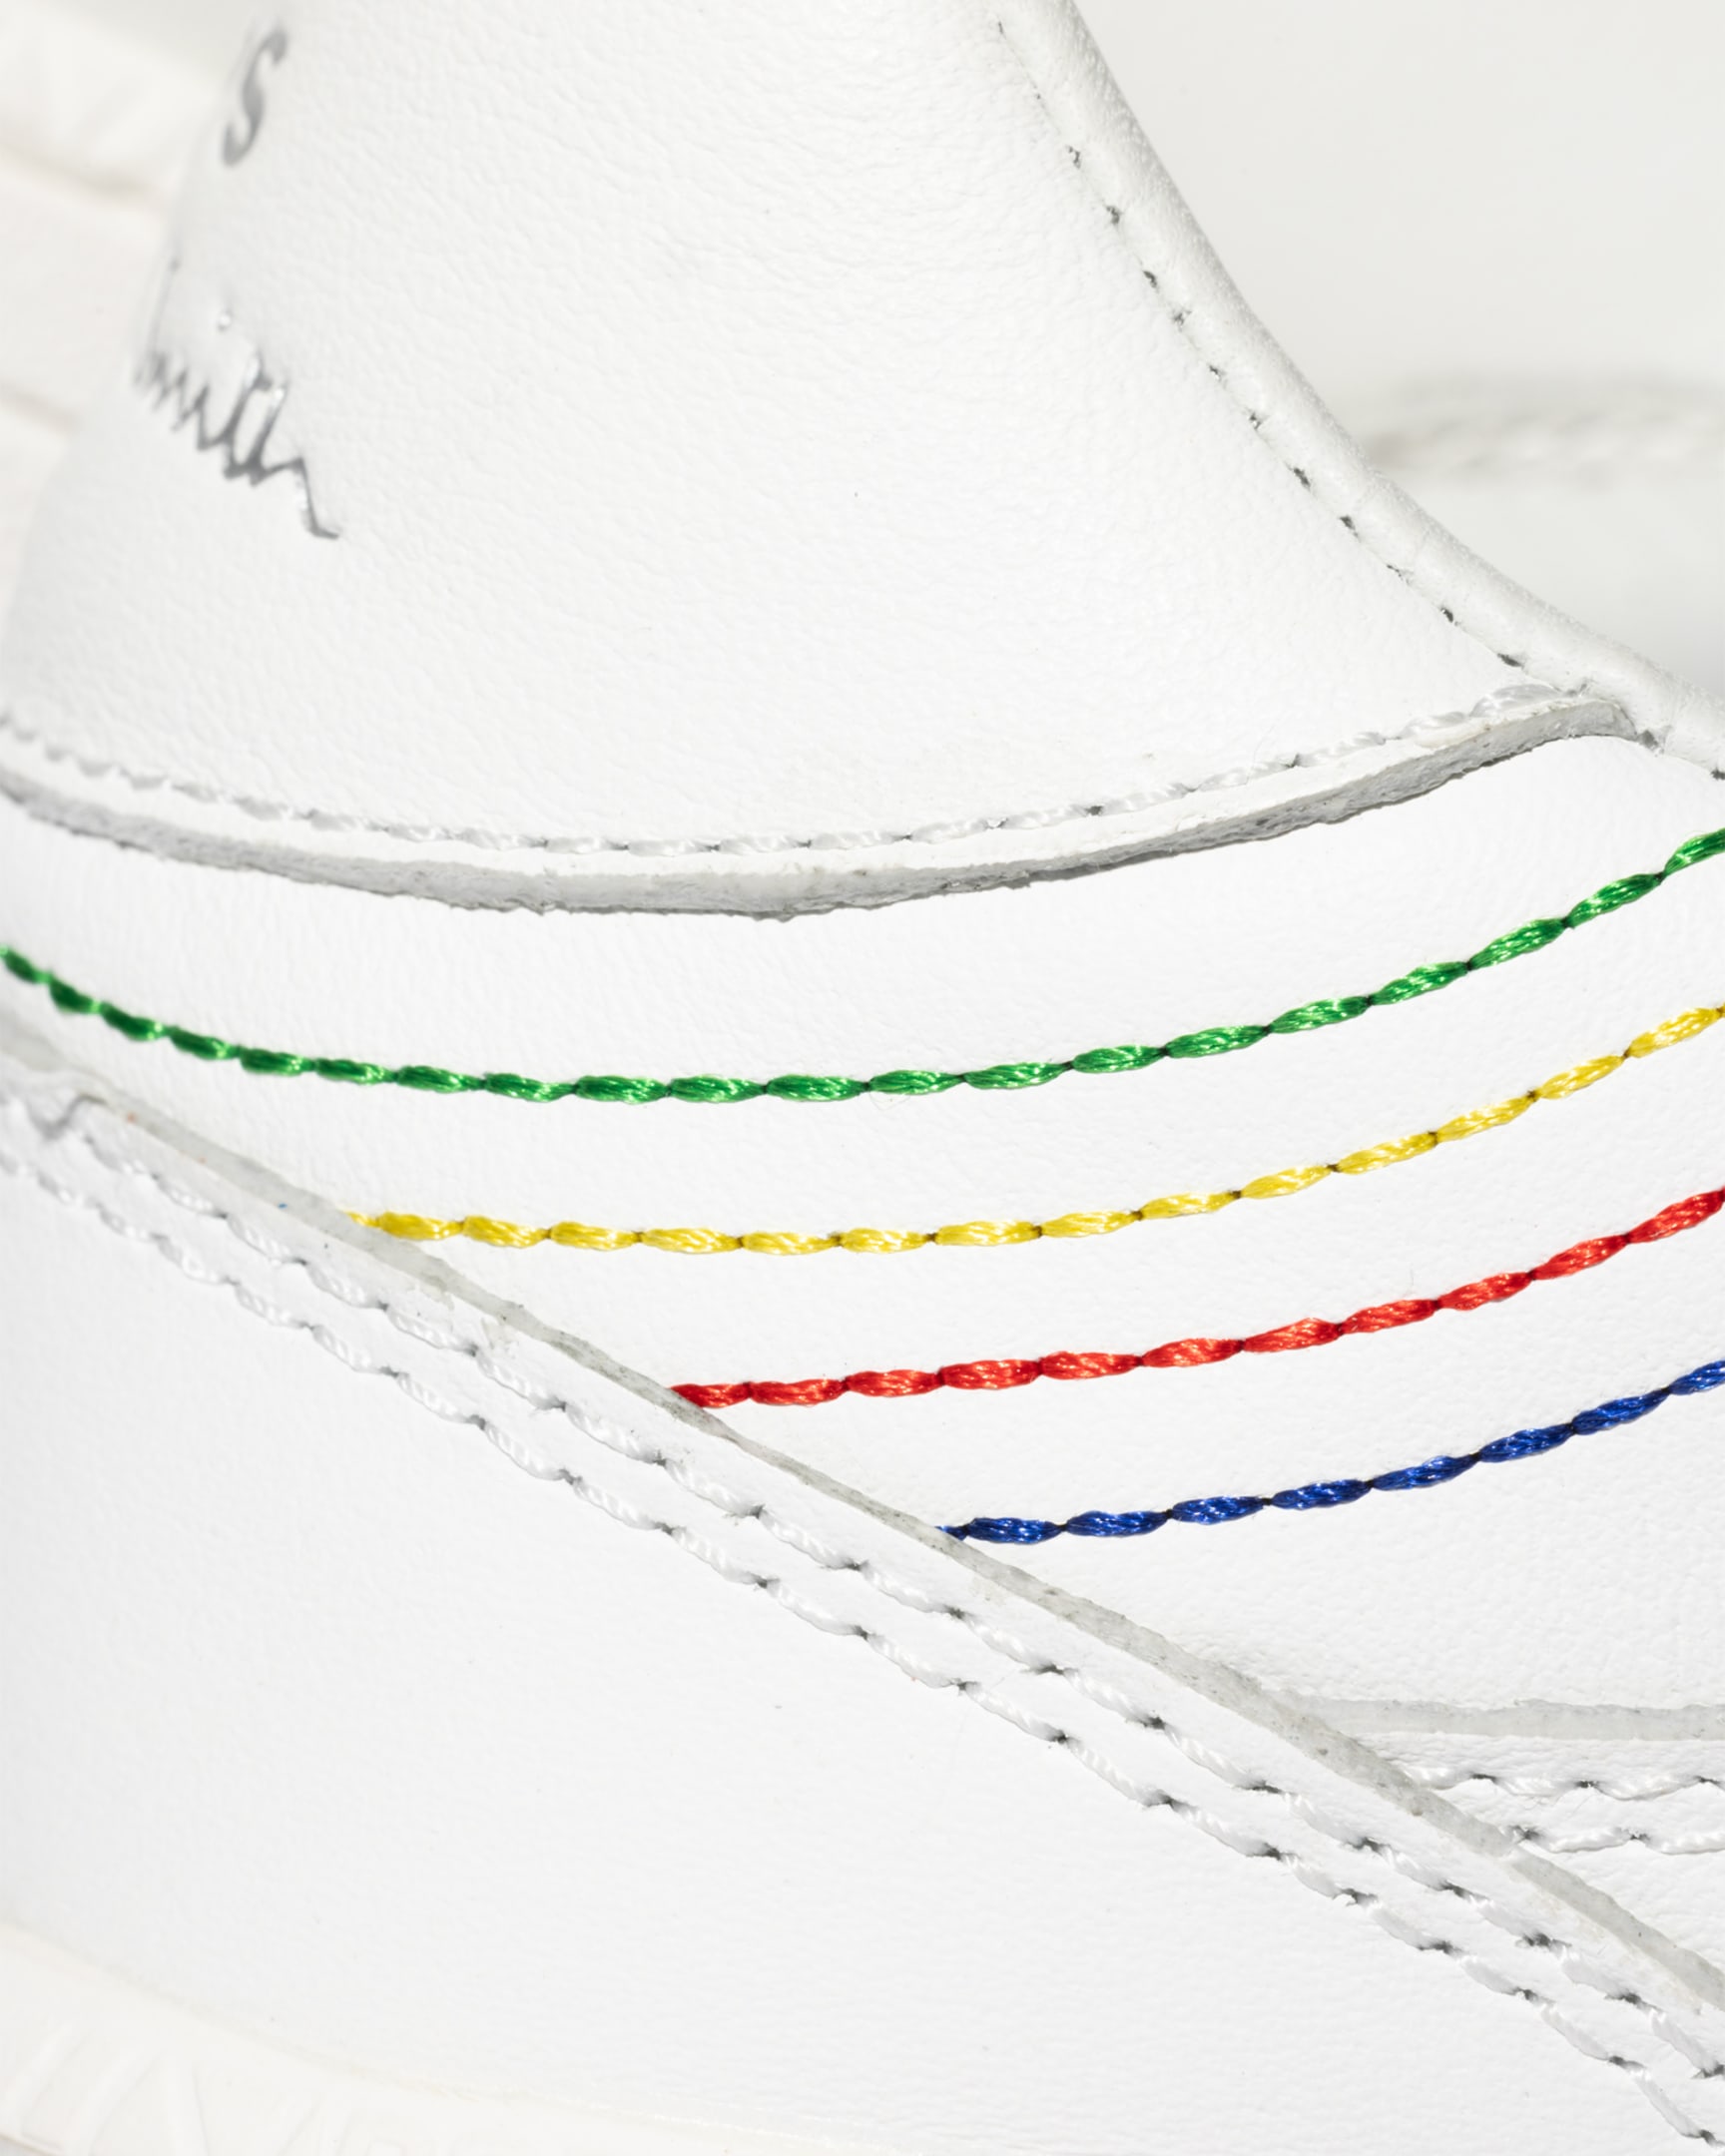 Detail View - White Leather 'Liston' Trainers Paul Smith